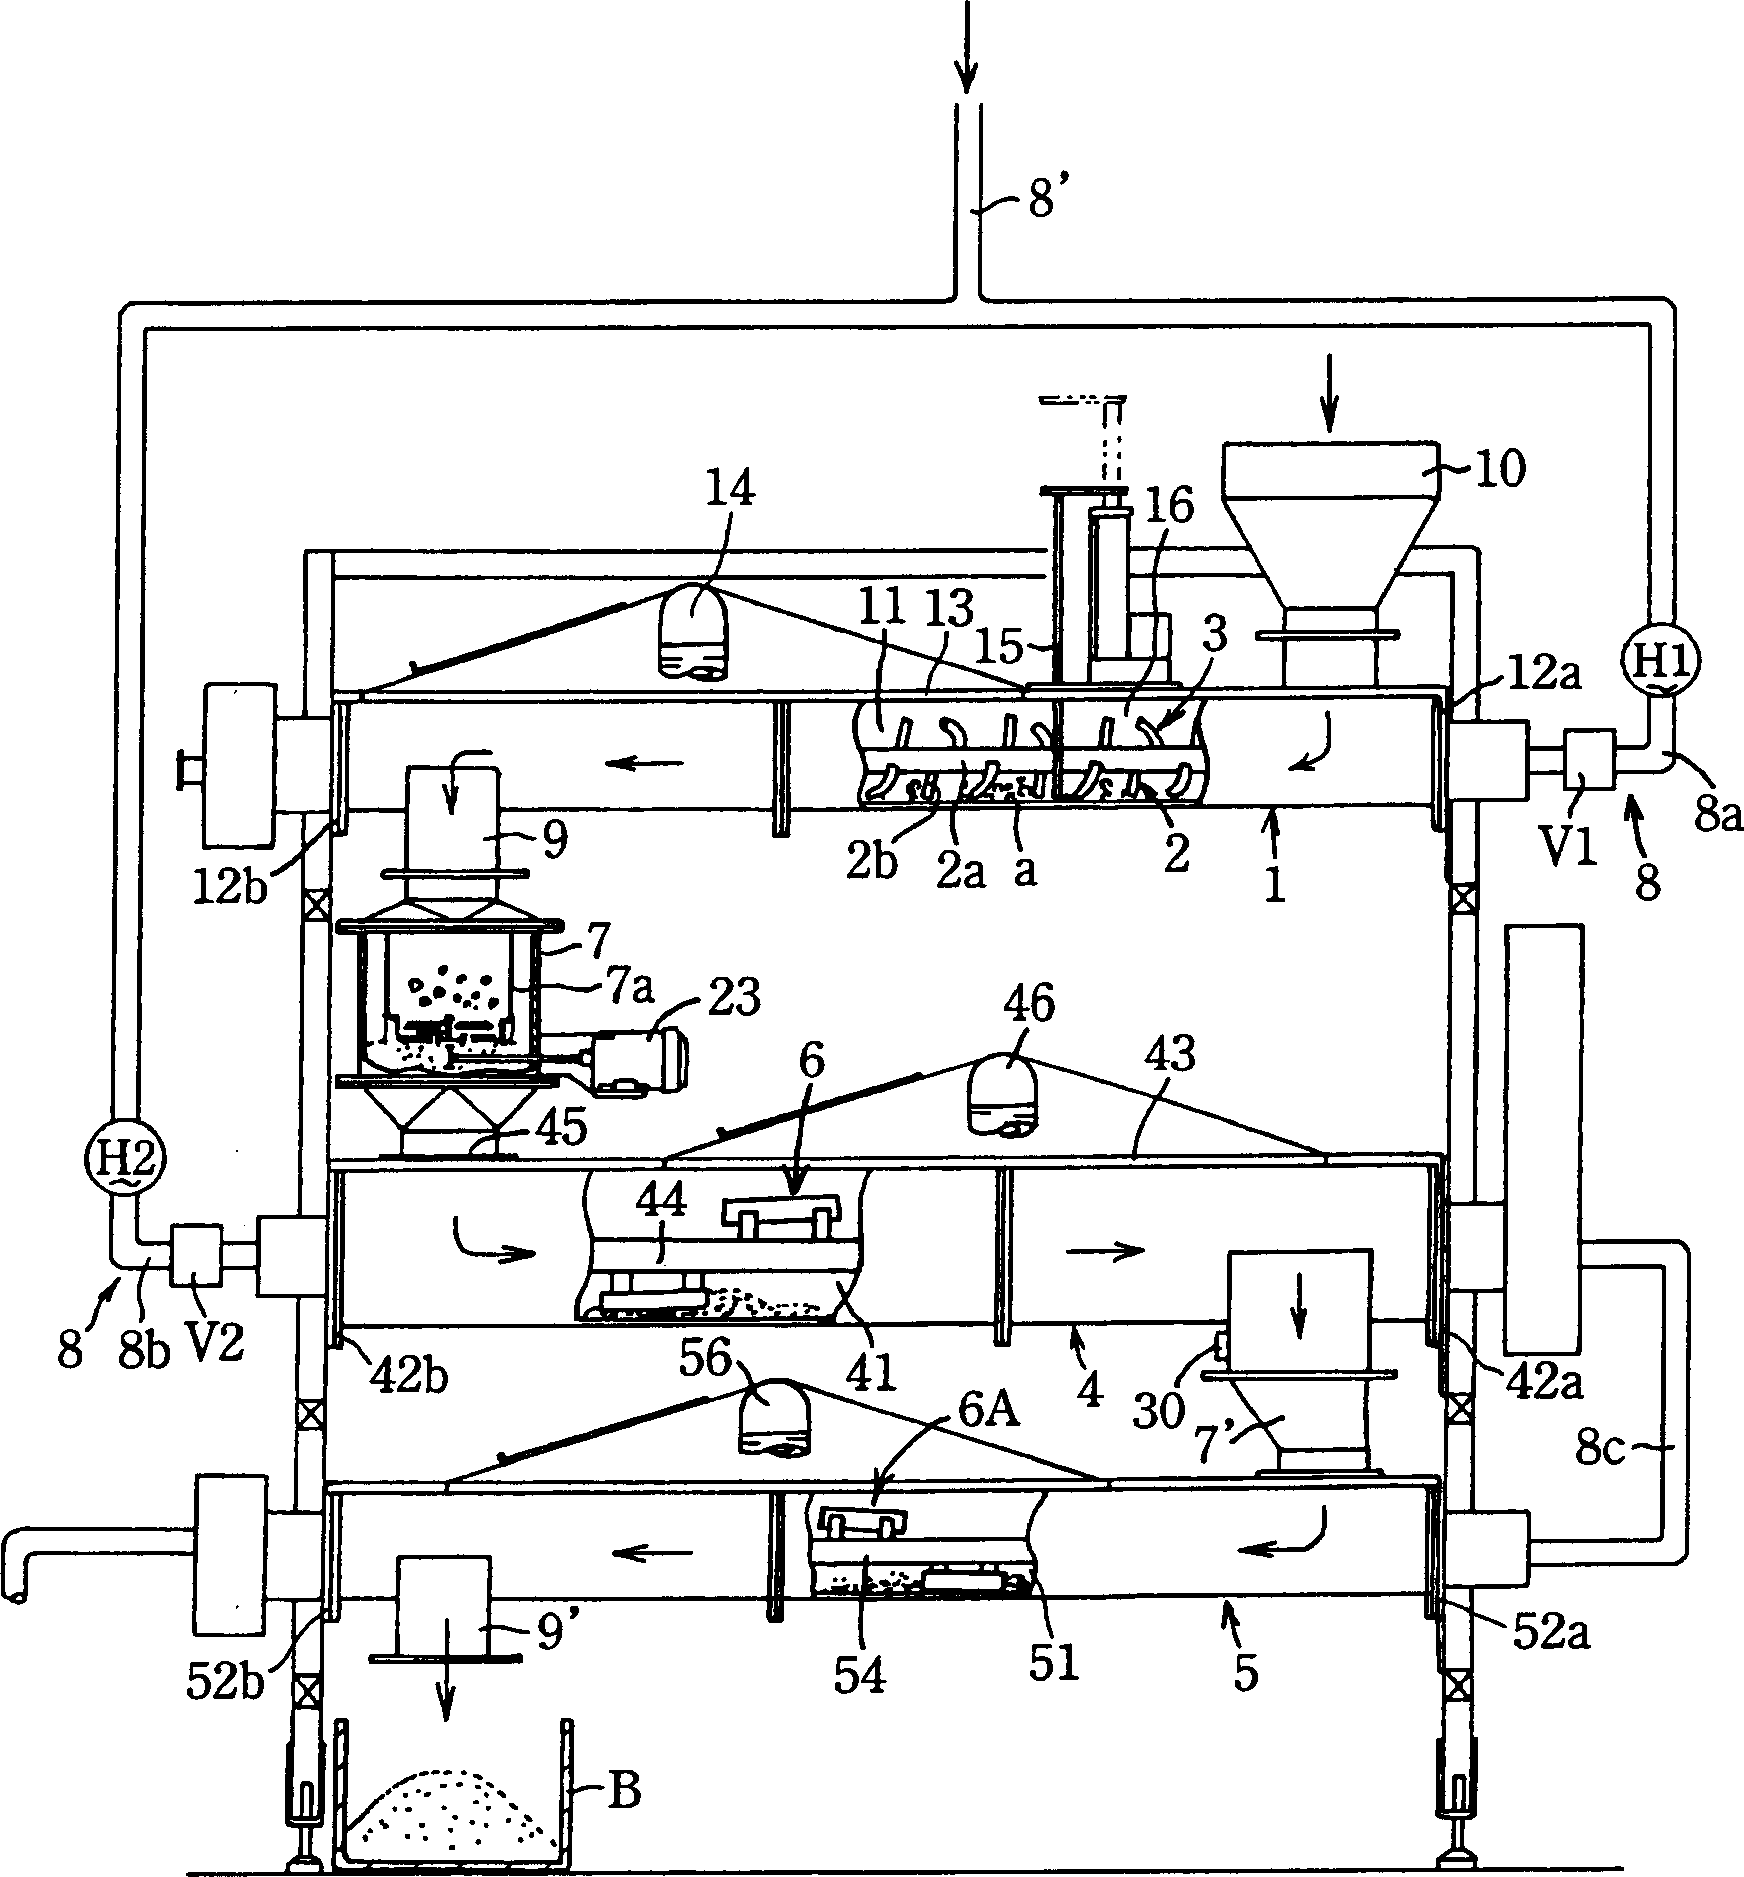 Method and device for treating waste bread